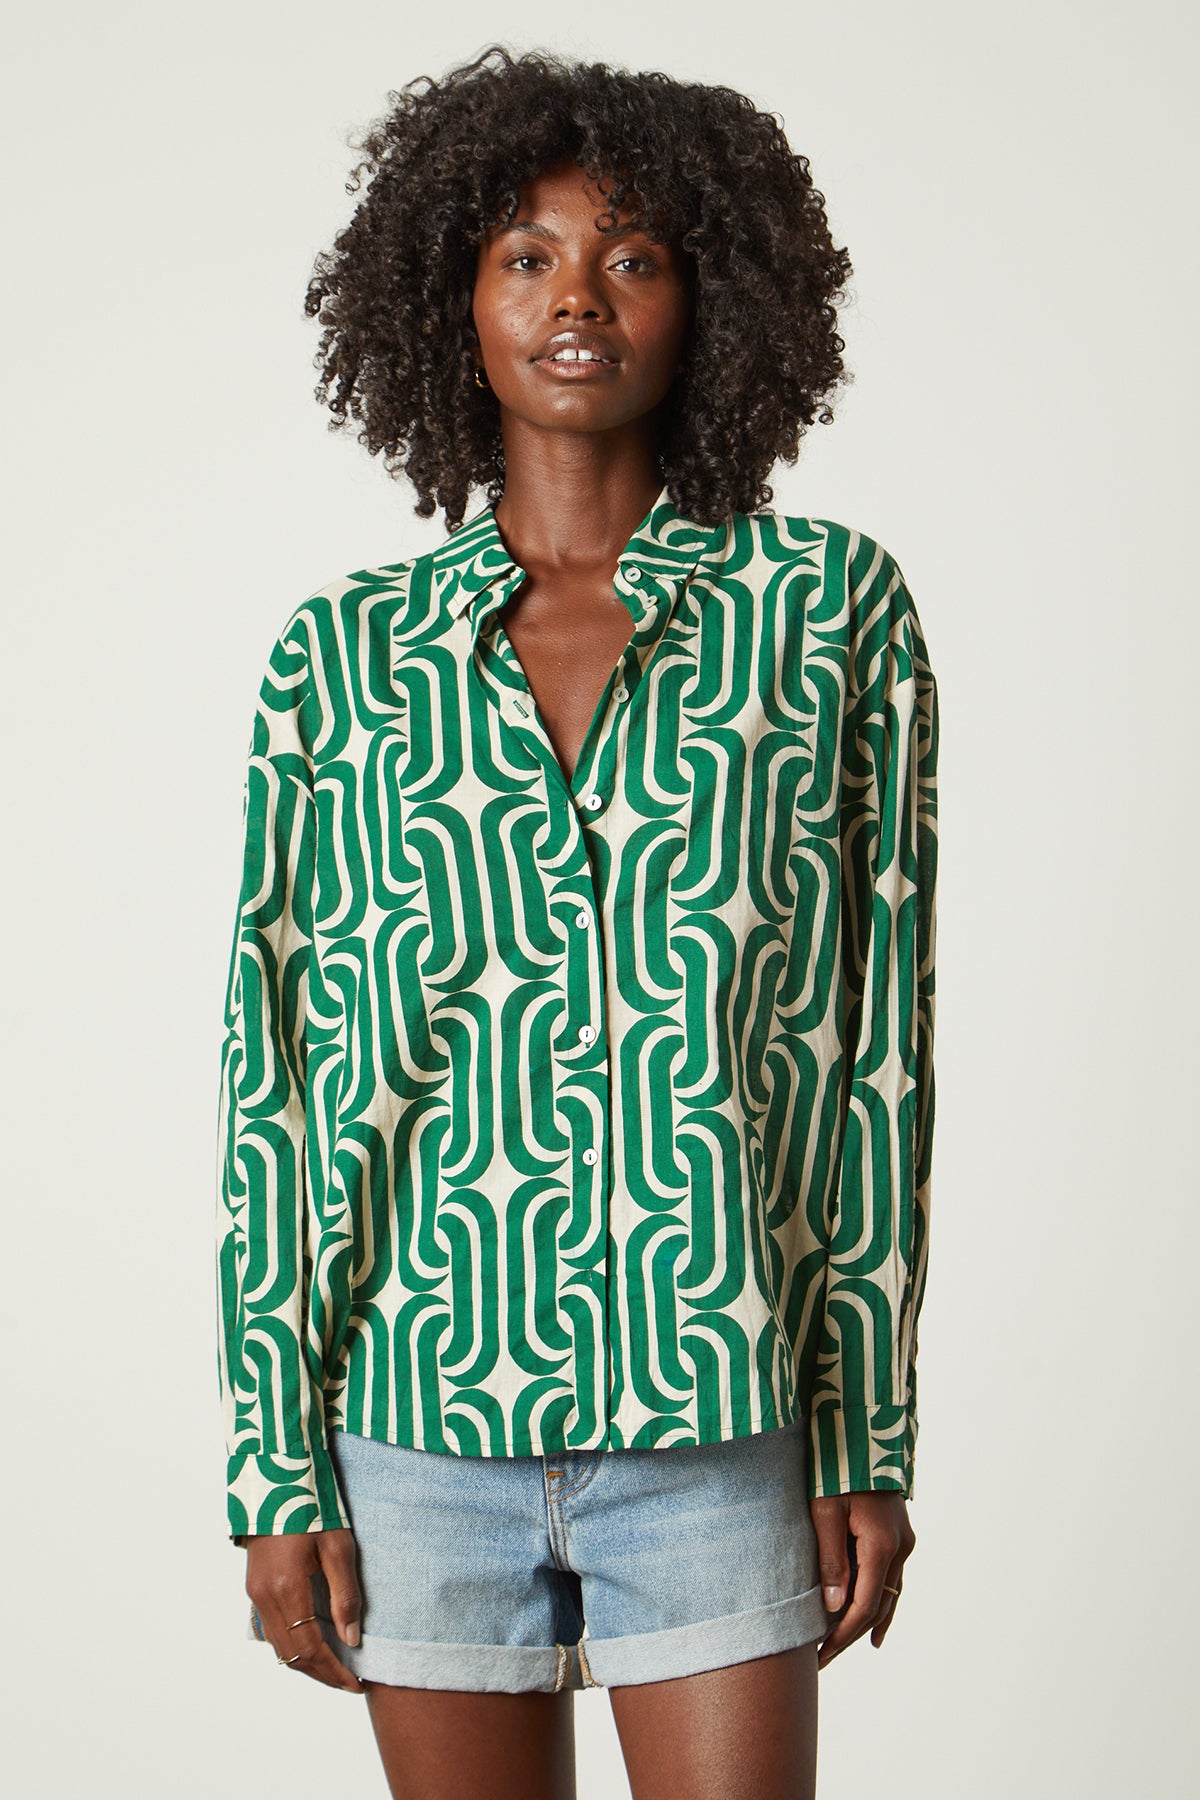 The model is wearing a Velvet by Graham & Spencer ANNALISE PRINTED TOP with a geometric pattern.-26142518542529